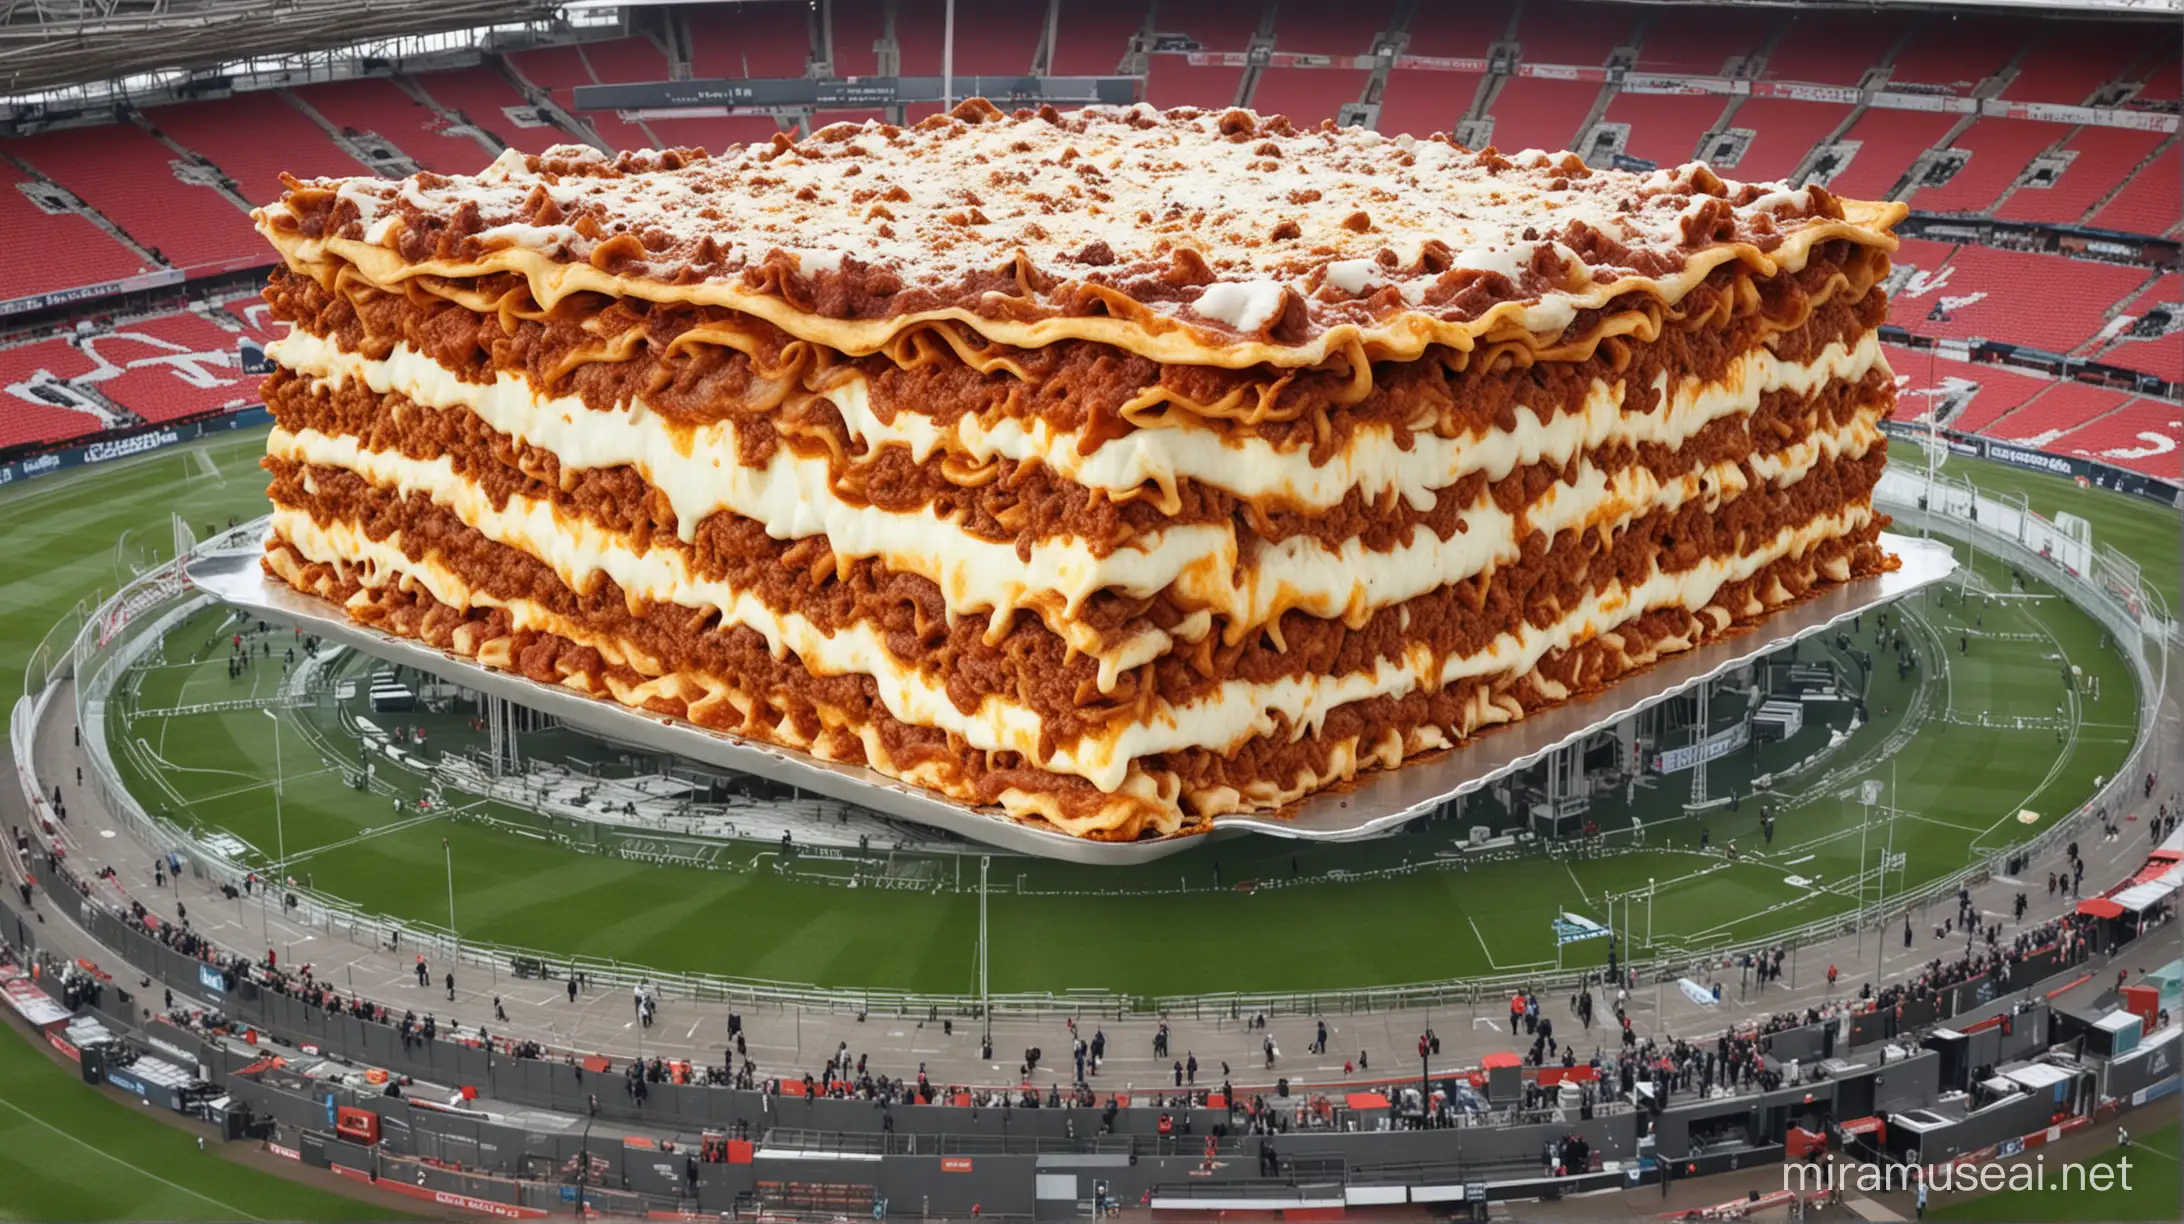 Giant Lasagna Takes Over Wembley Stadium in Realistic Shot